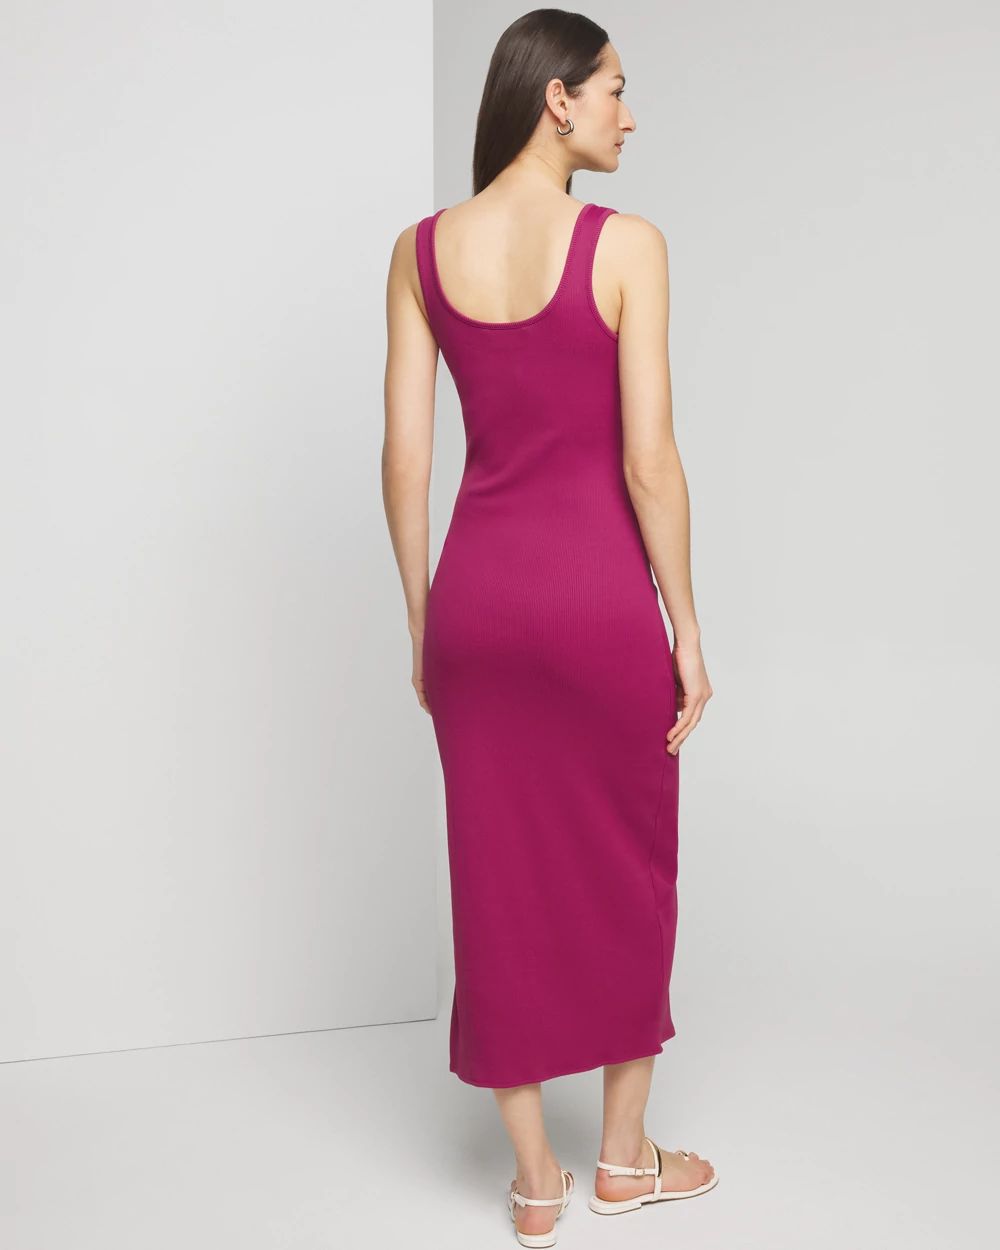 WHBM® FORME Rib Scoopneck Dress click to view larger image.